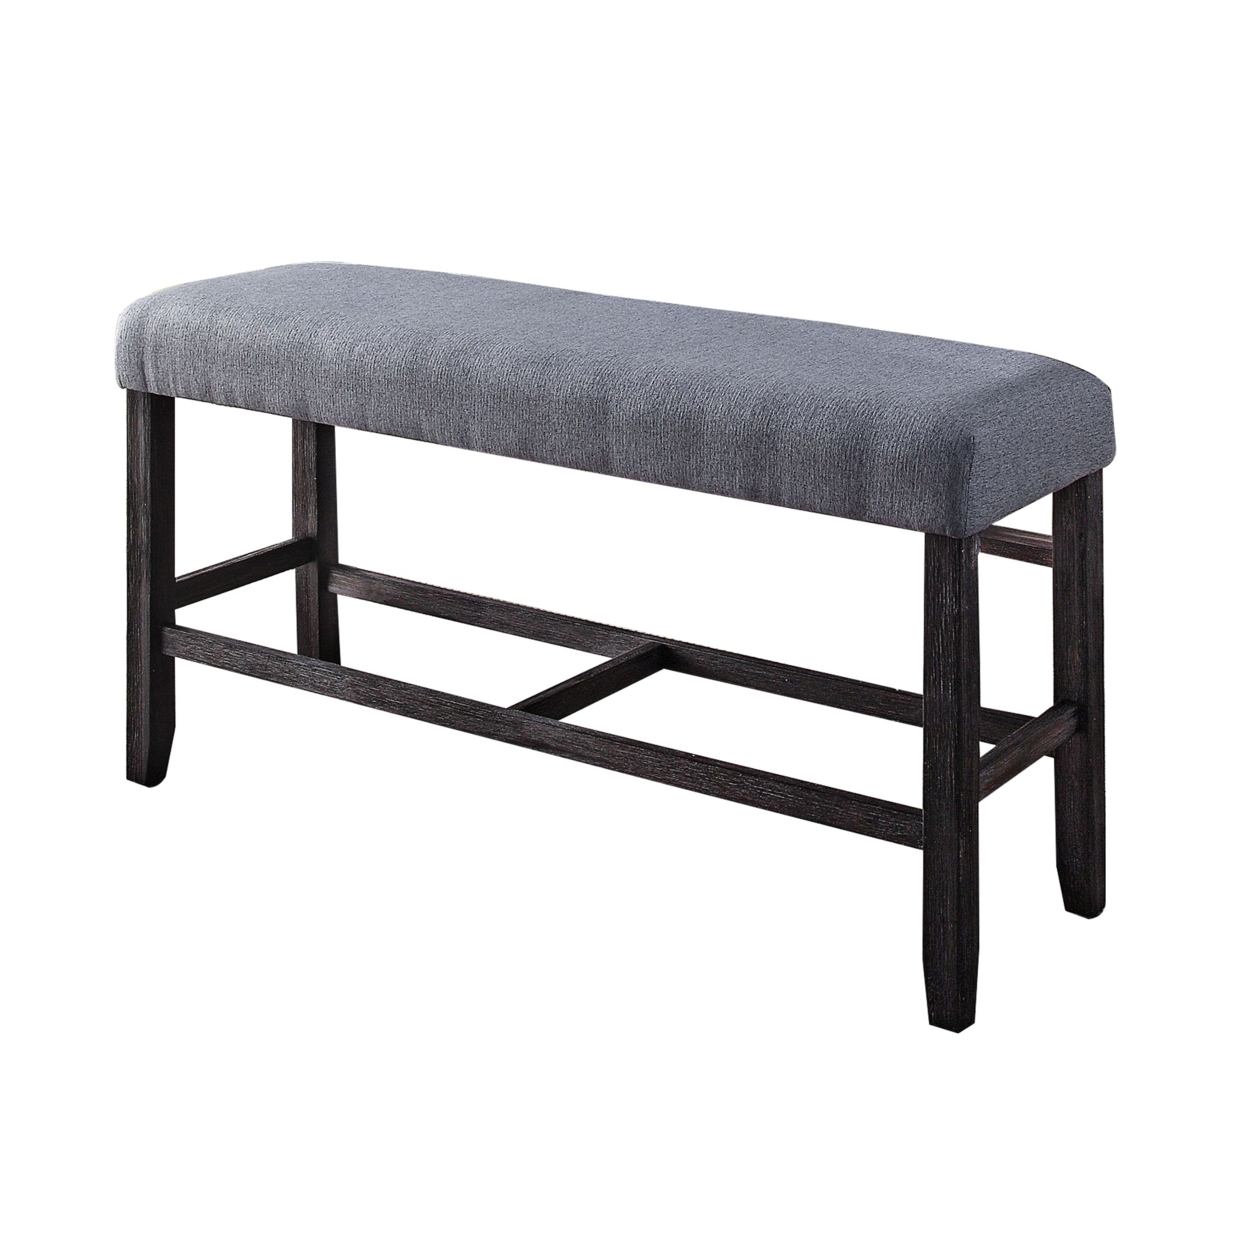 Rectangular Fabric Counter Height Bench With Padded Seat, Brown And Blue- Saltoro Sherpi